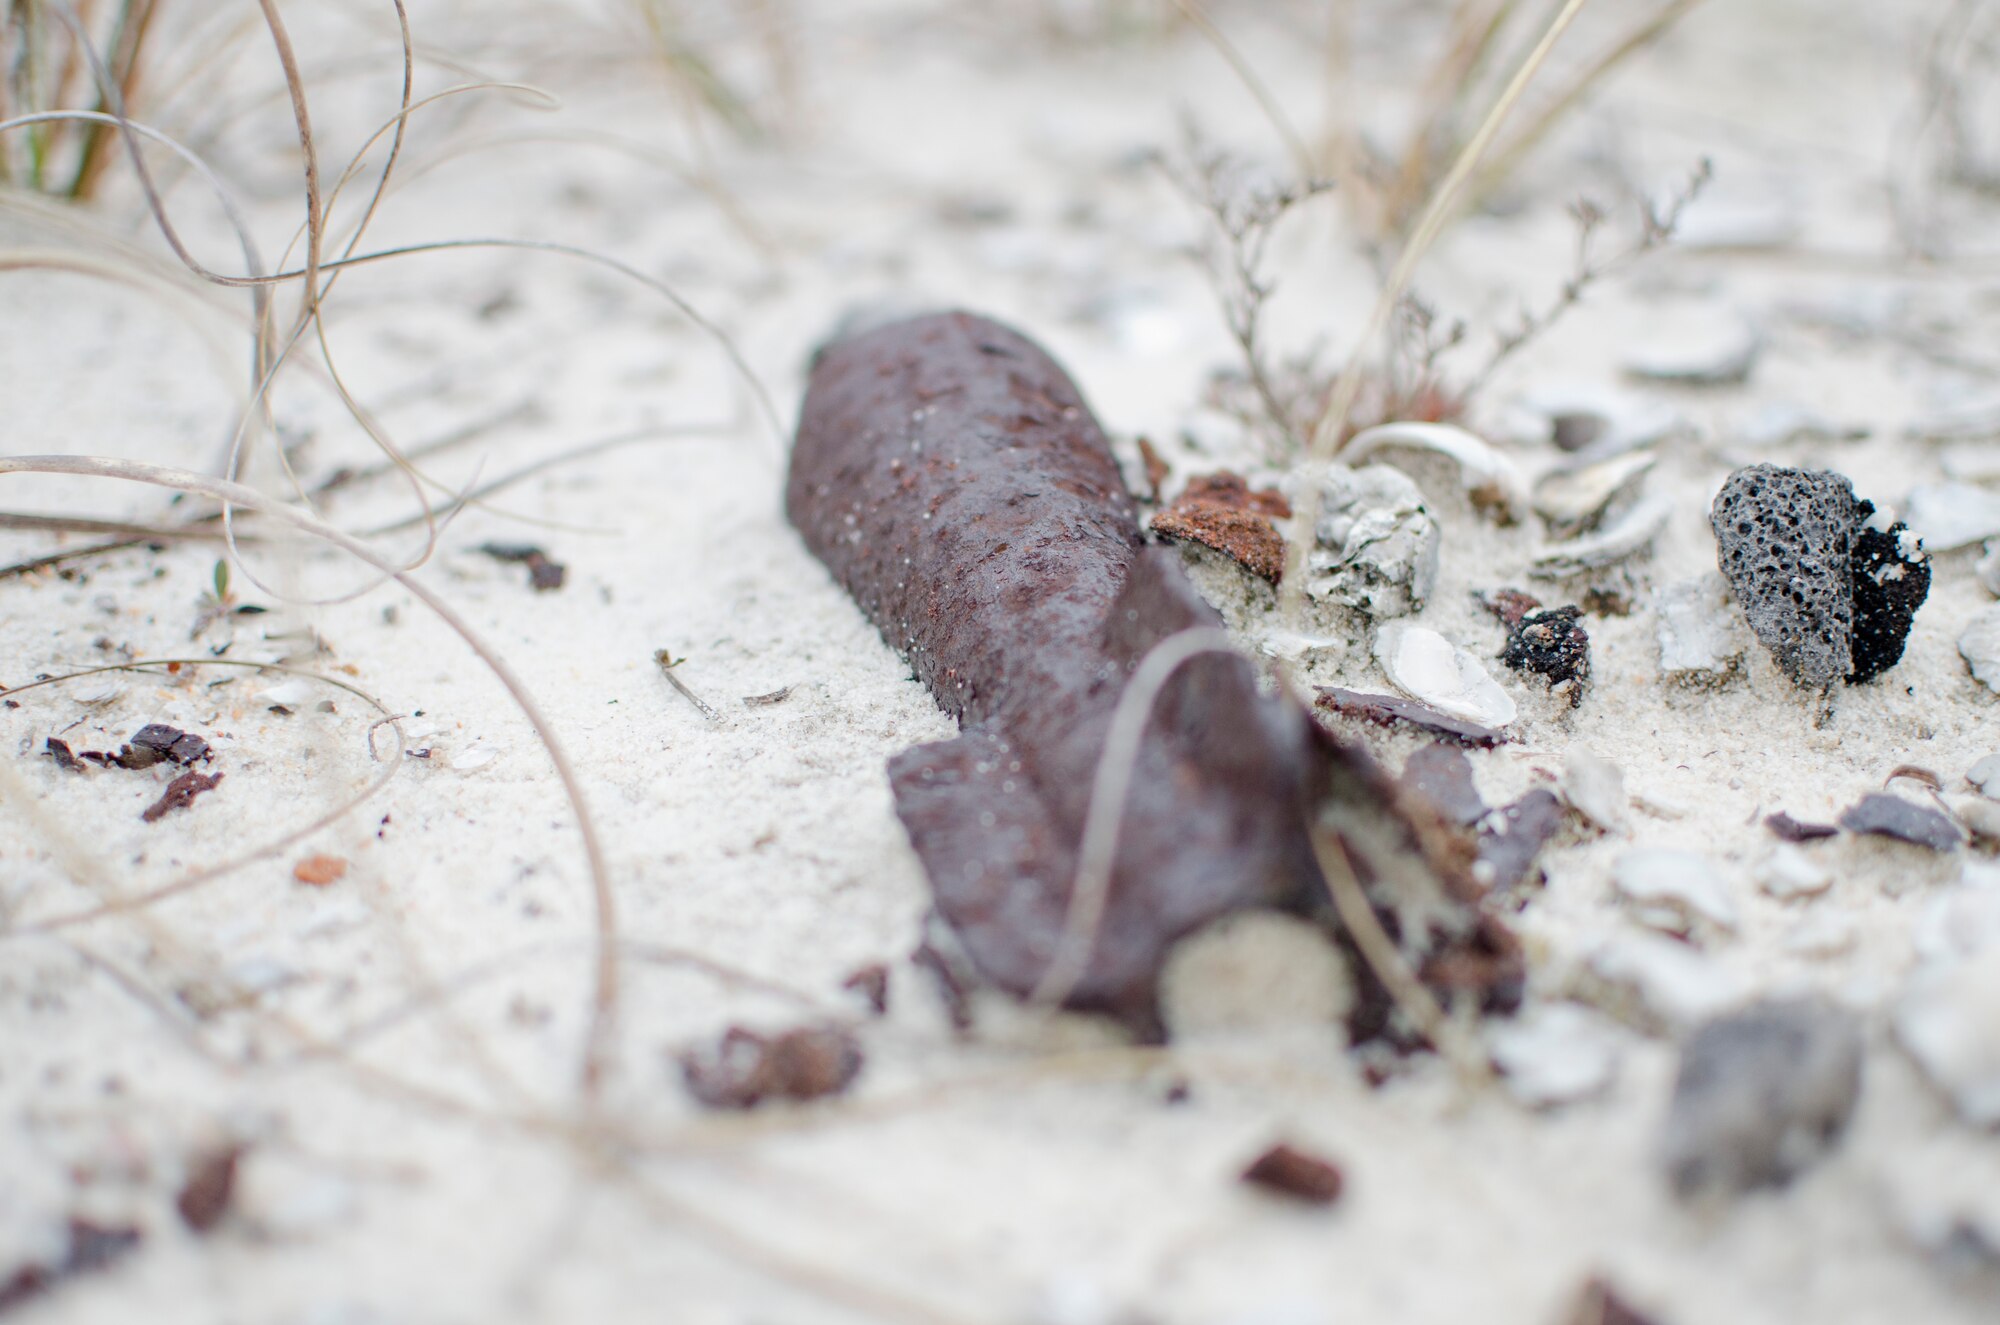 An unexploded ordnance sits in the sand at Perdido Key, Fla., March 12, 2014. UXOs washed ashore from military training, which took place off the coast. They can be extremely dangerous if disturbed. (U.S. Air Force photo/Staff Sgt. John Bainter)